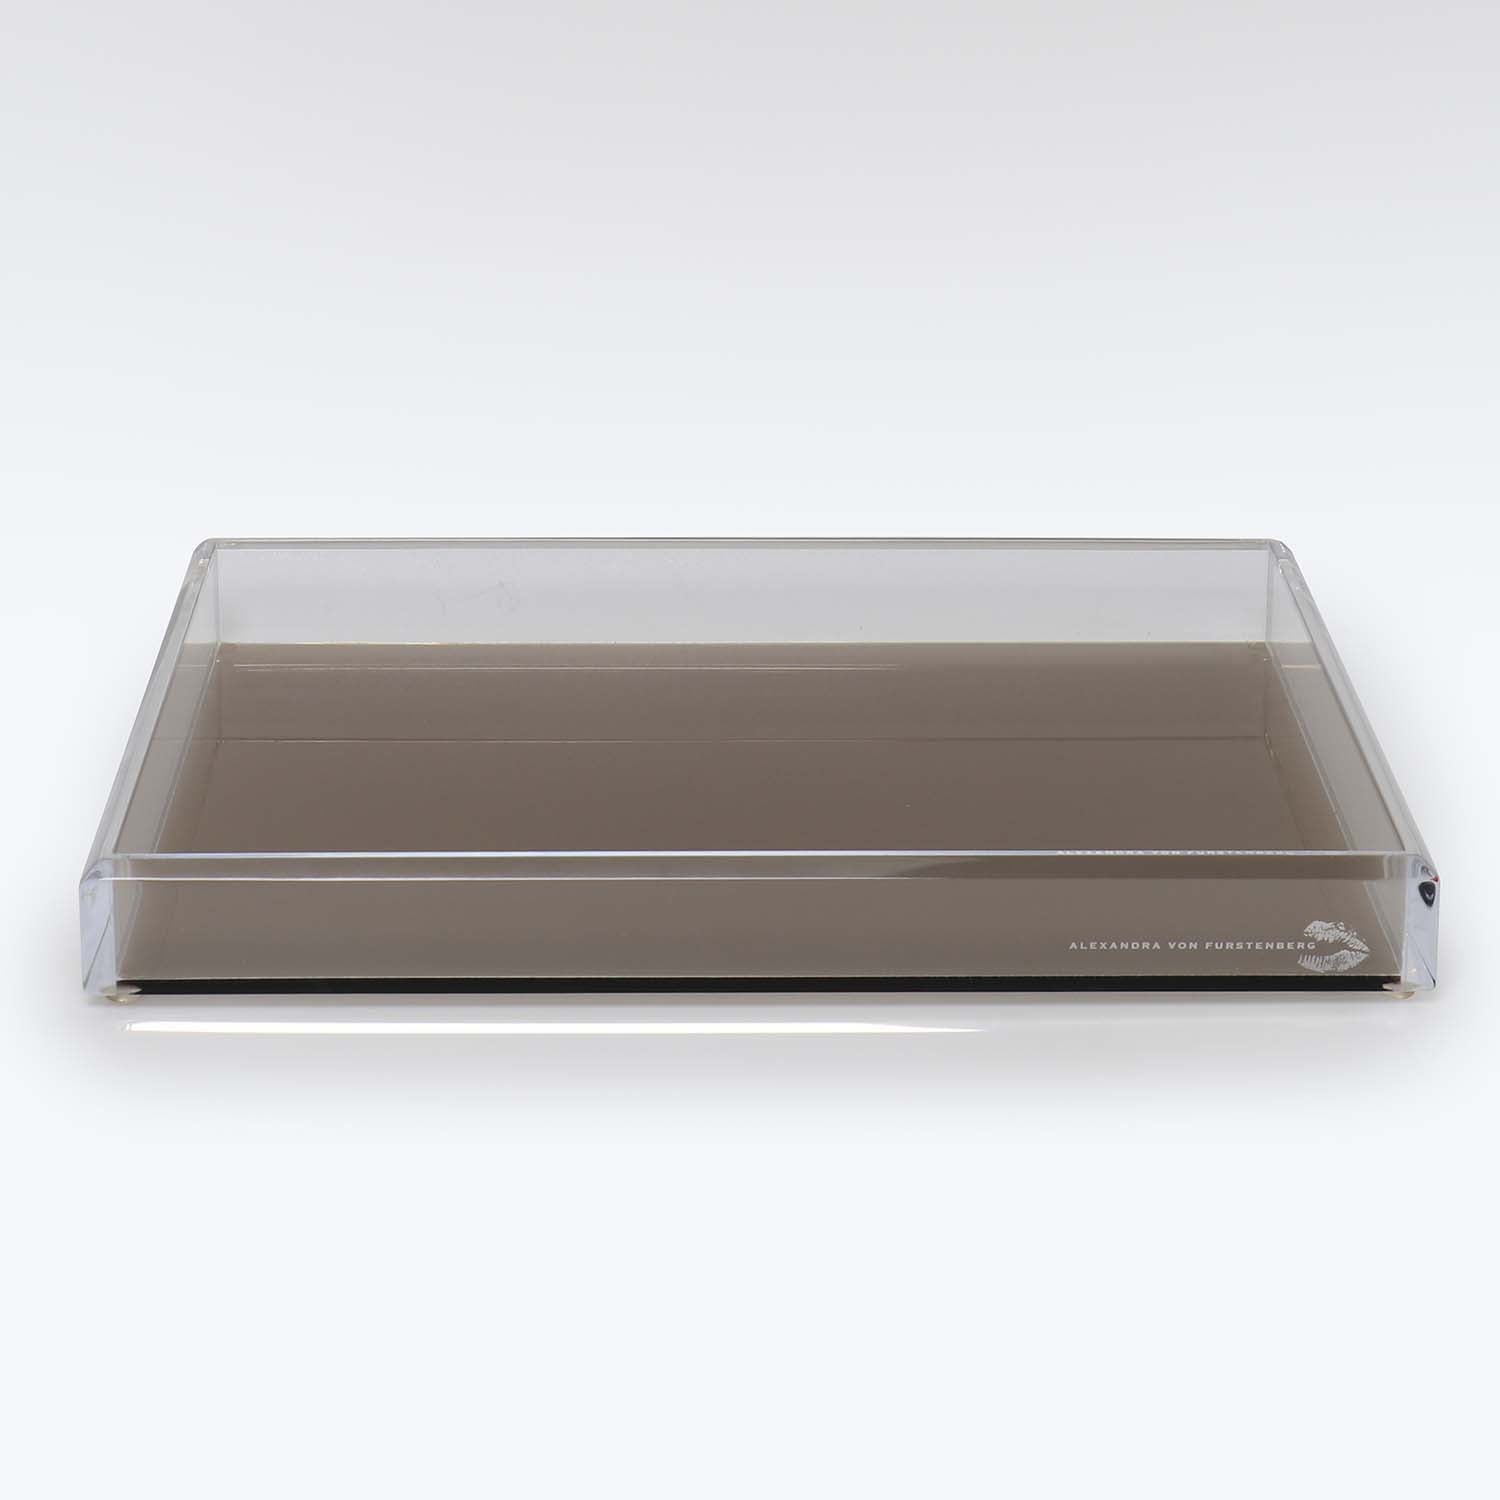 Transparent rectangular tray with a brown base and signature text.